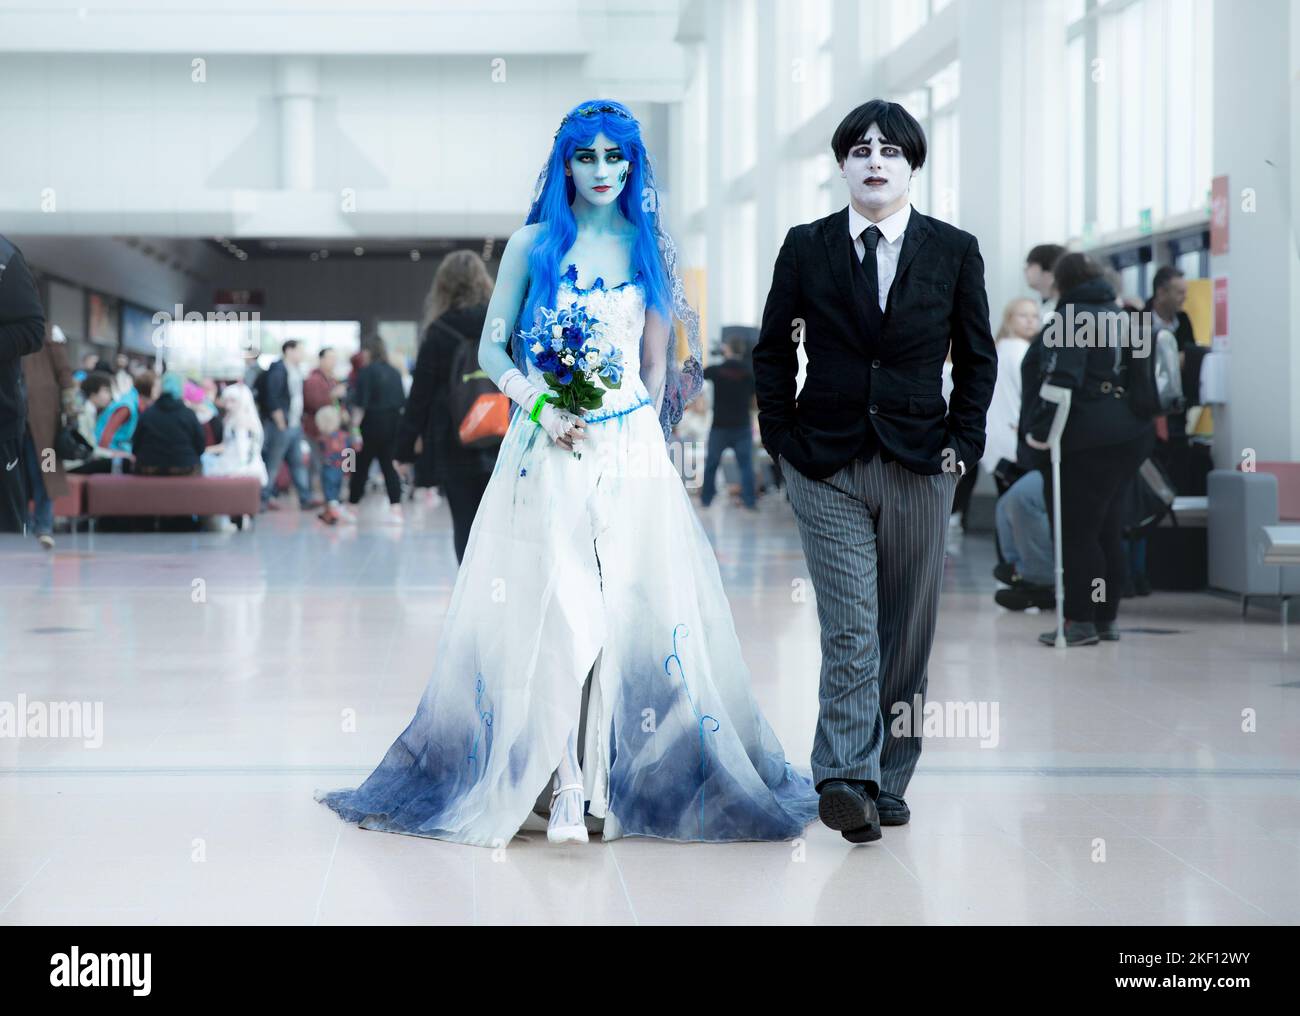 BIRMINGHAM, UK - NOVEMBER 13, 2022.  A bride and groom pair of cosplayers dressed as Timothy Burton's Corpse Bride and Dead Boy Walking at MCM Birming Stock Photo